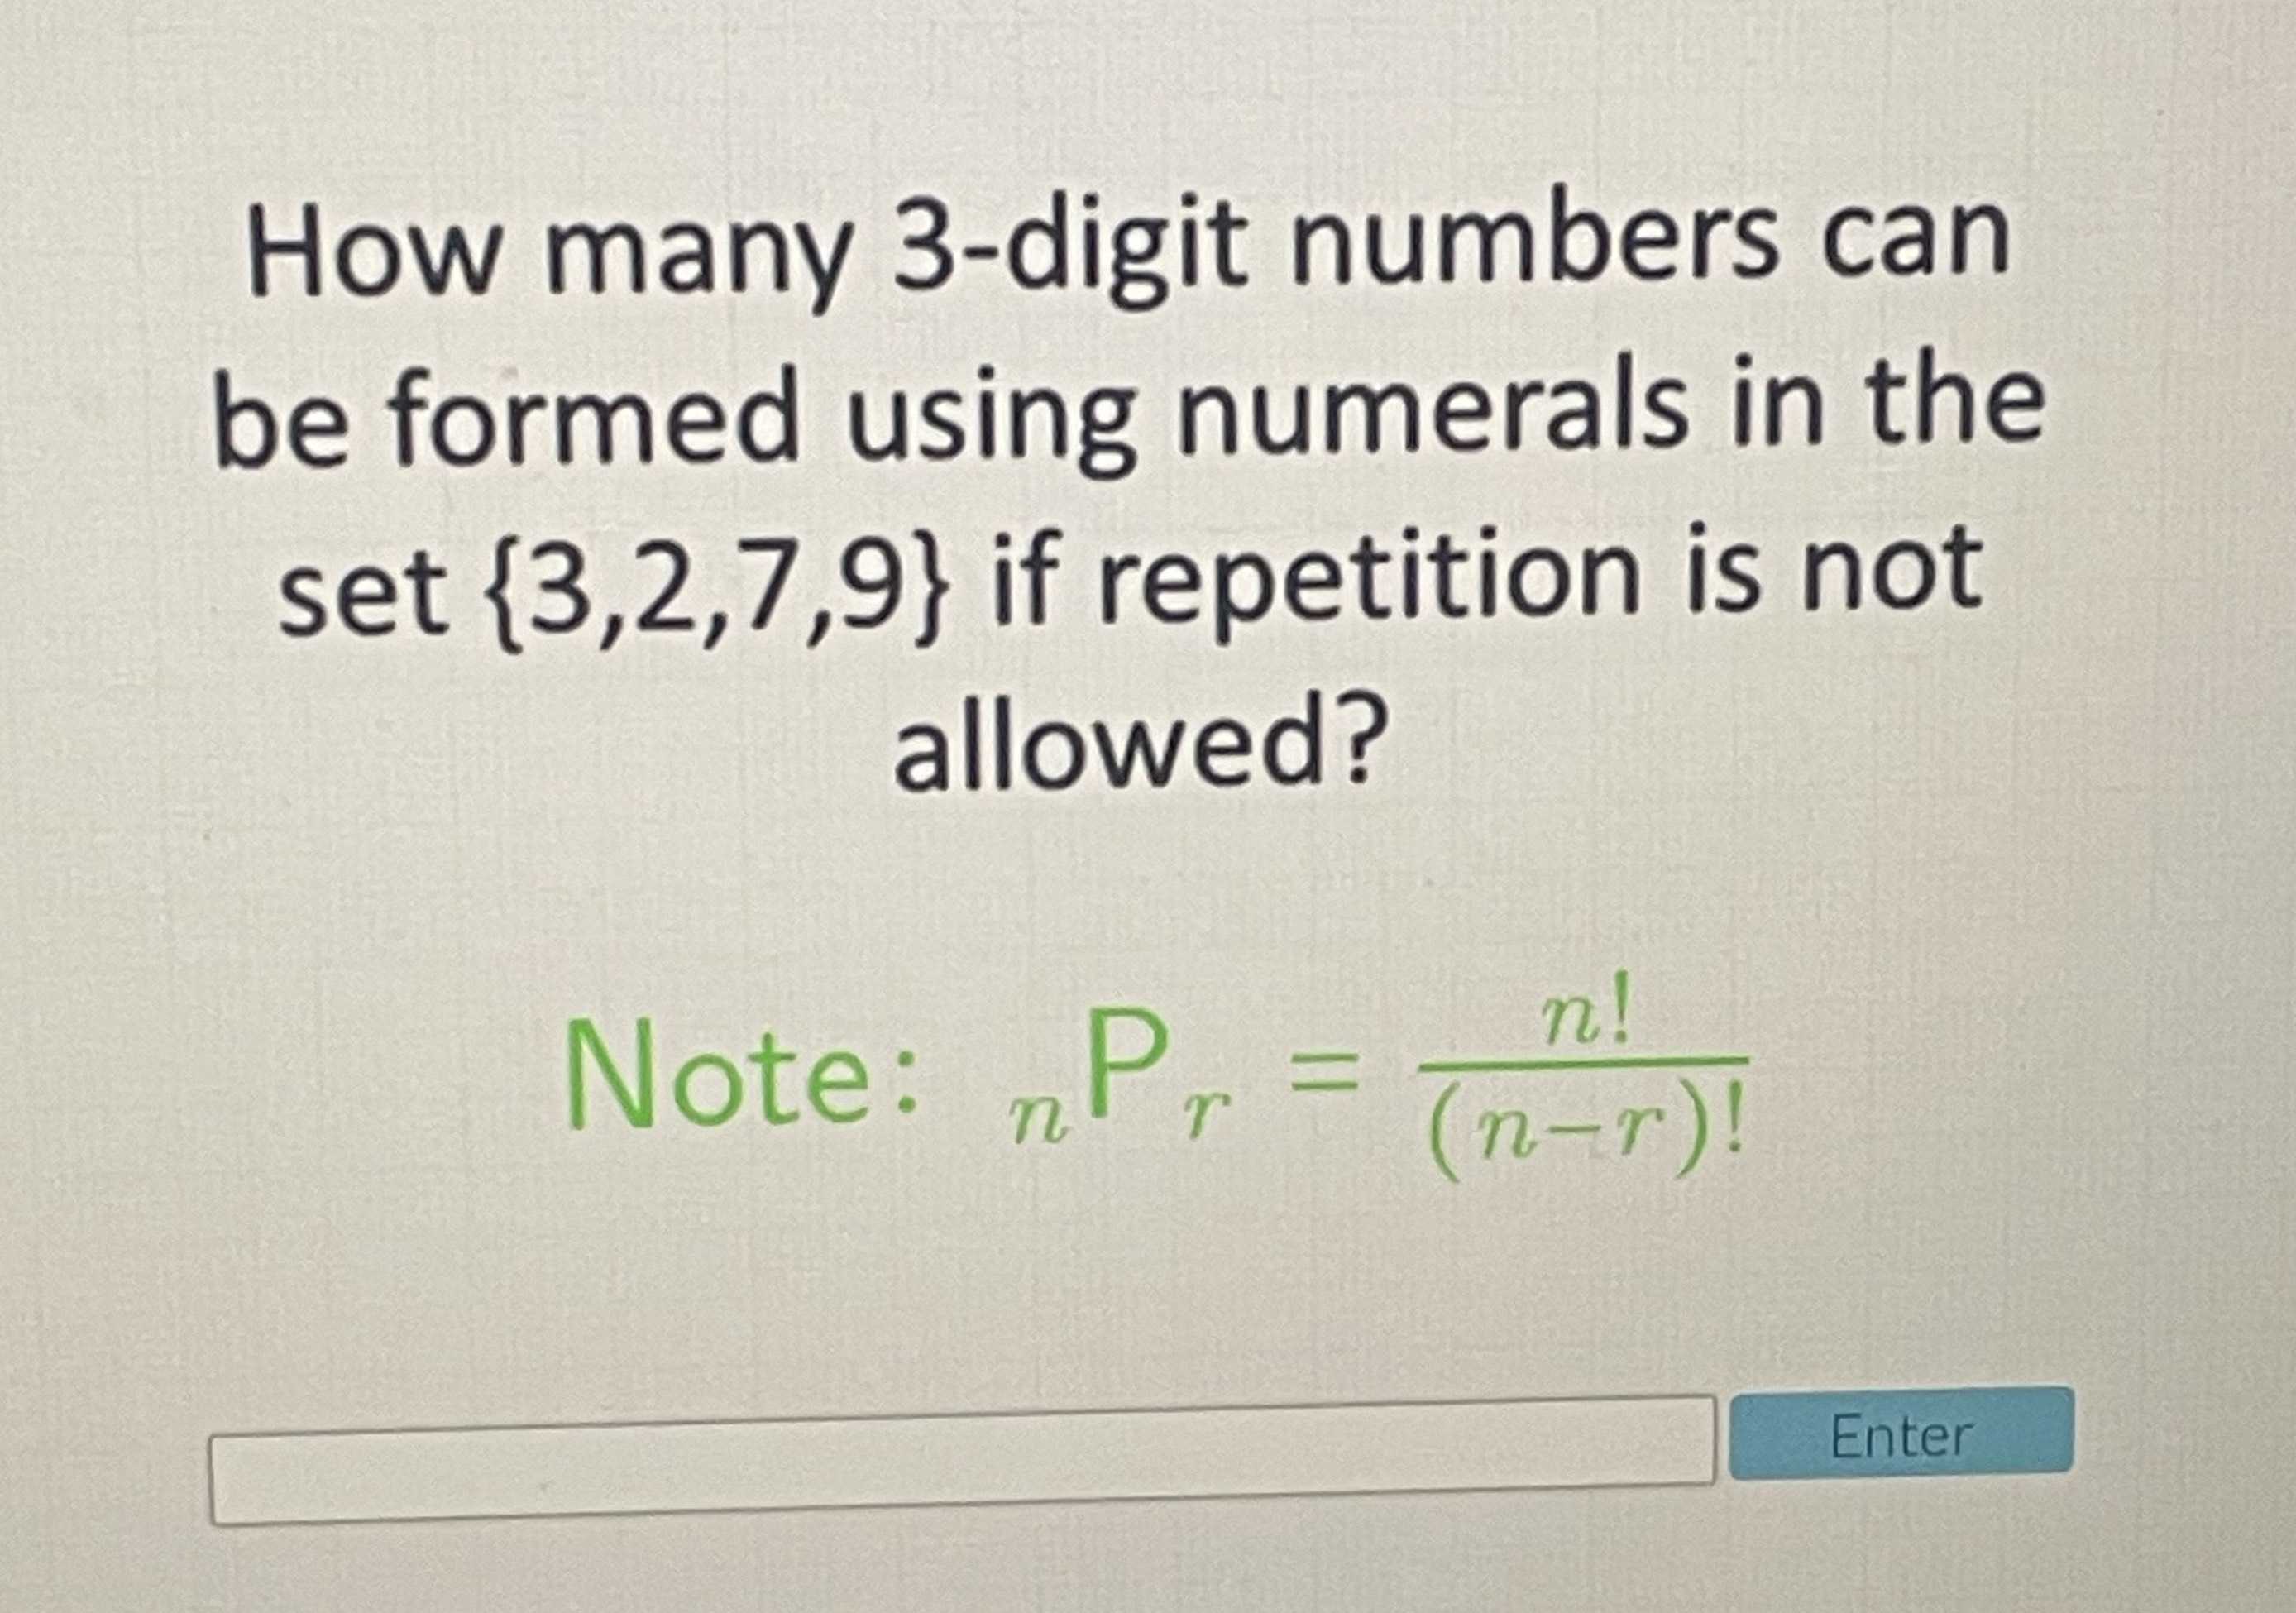 how-many-3-digit-numbers-can-be-formed-using-numer-cameramath